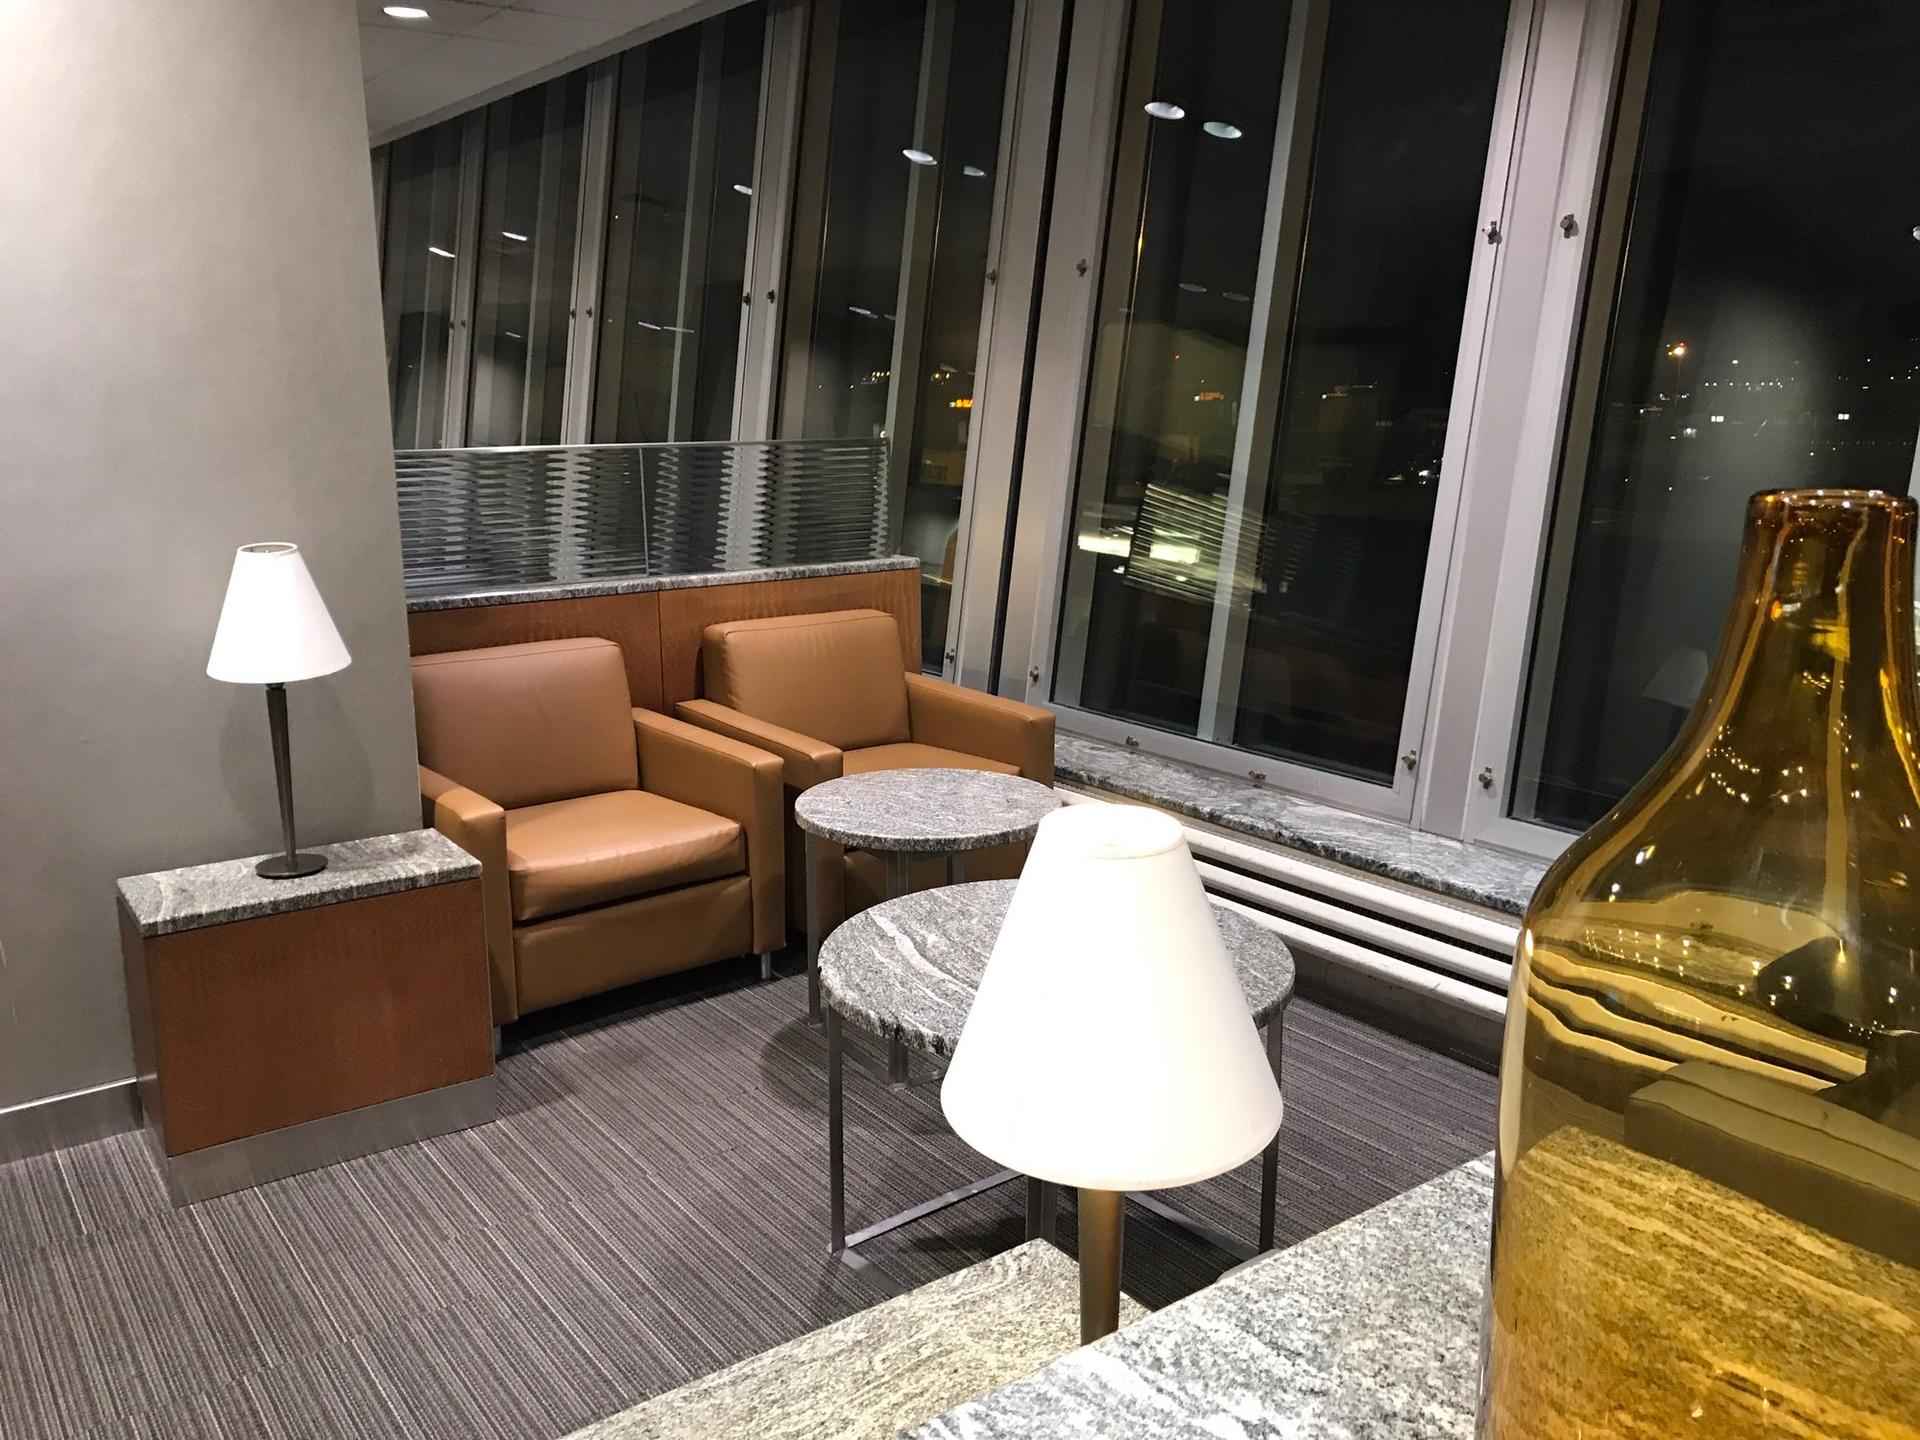 American Airlines Admirals Club image 21 of 48